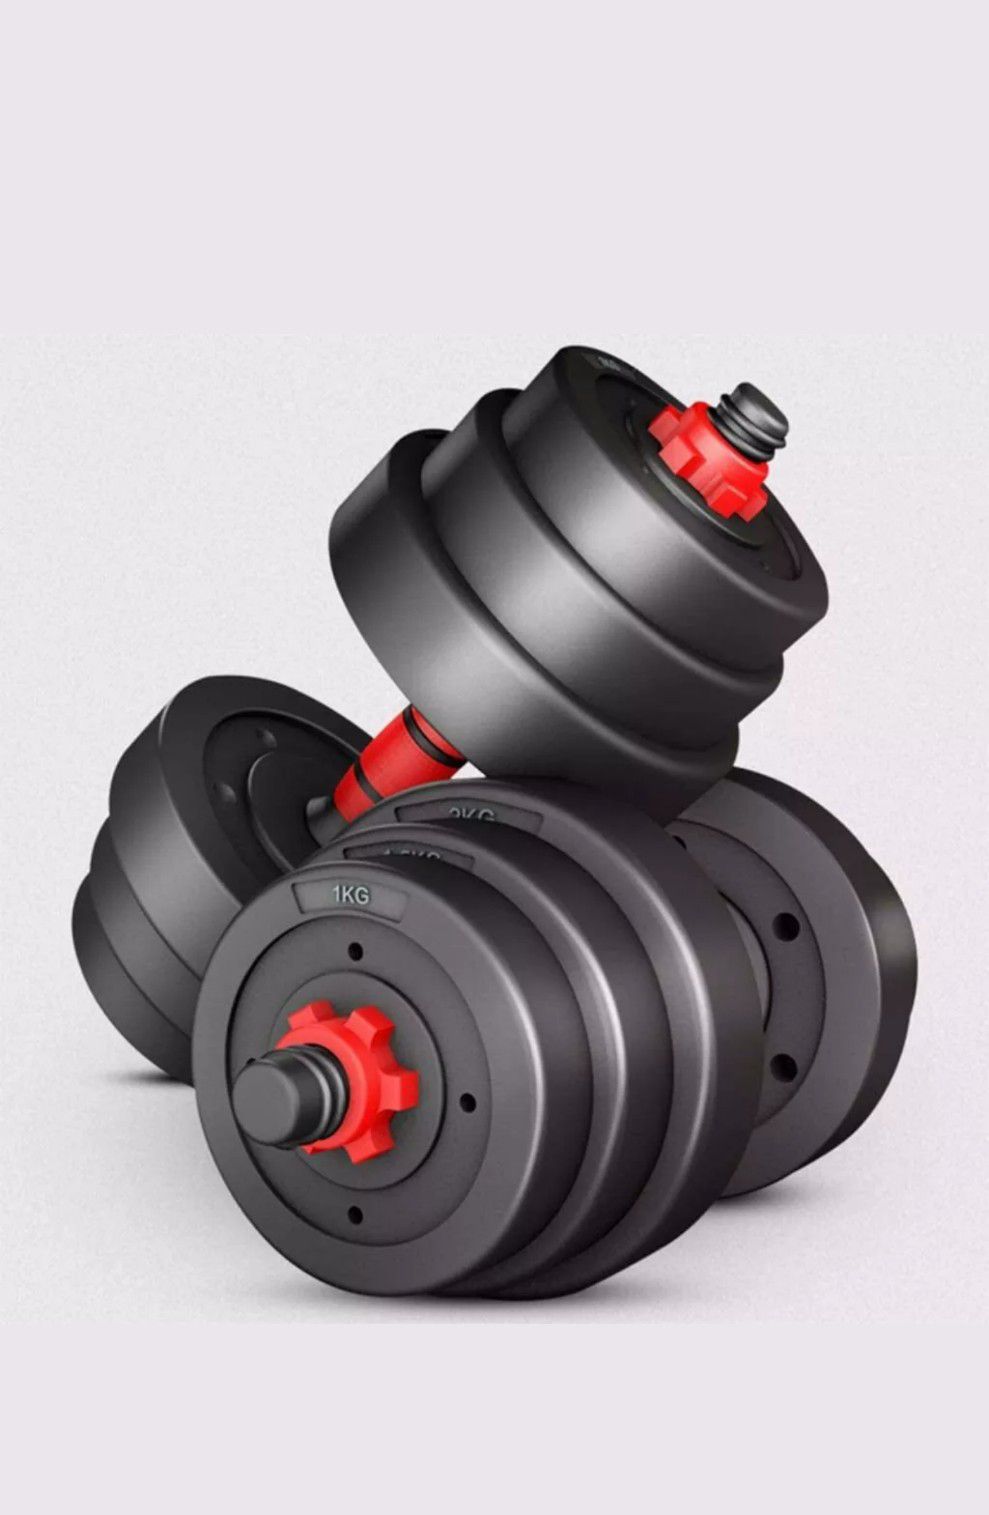 Adjustable dumbbell and barbell